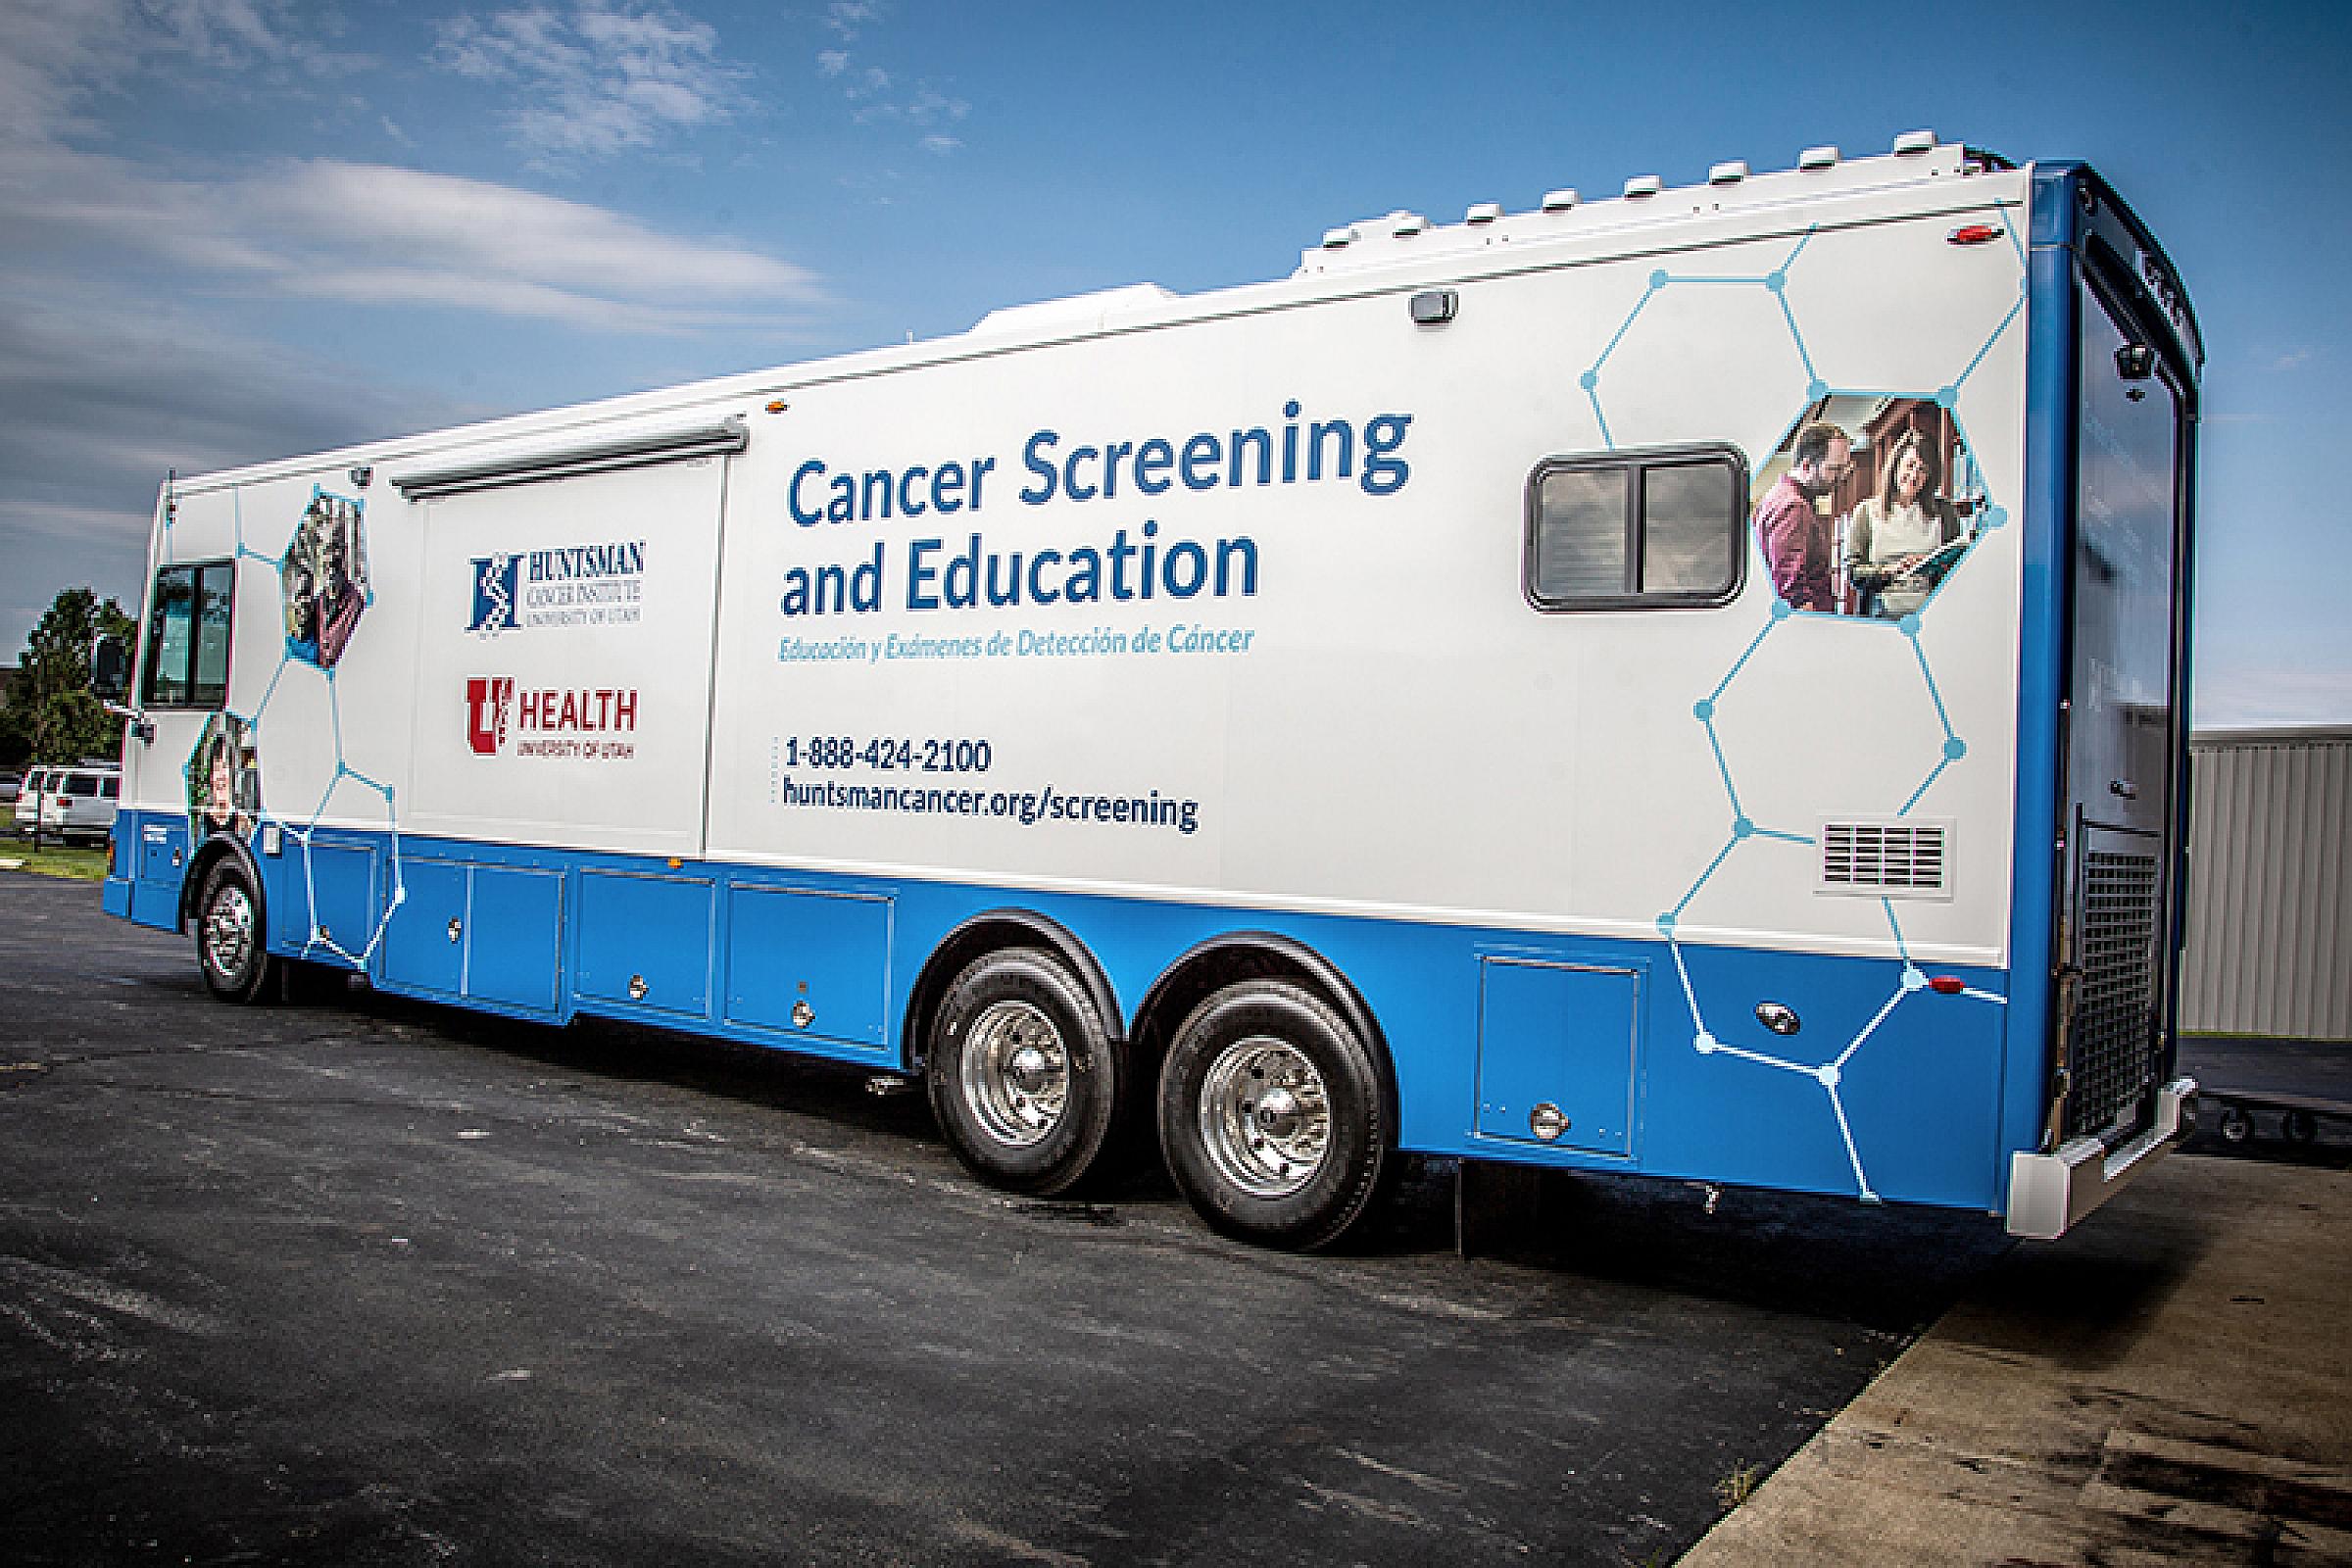 Cancer Screening and Education bus view from behind